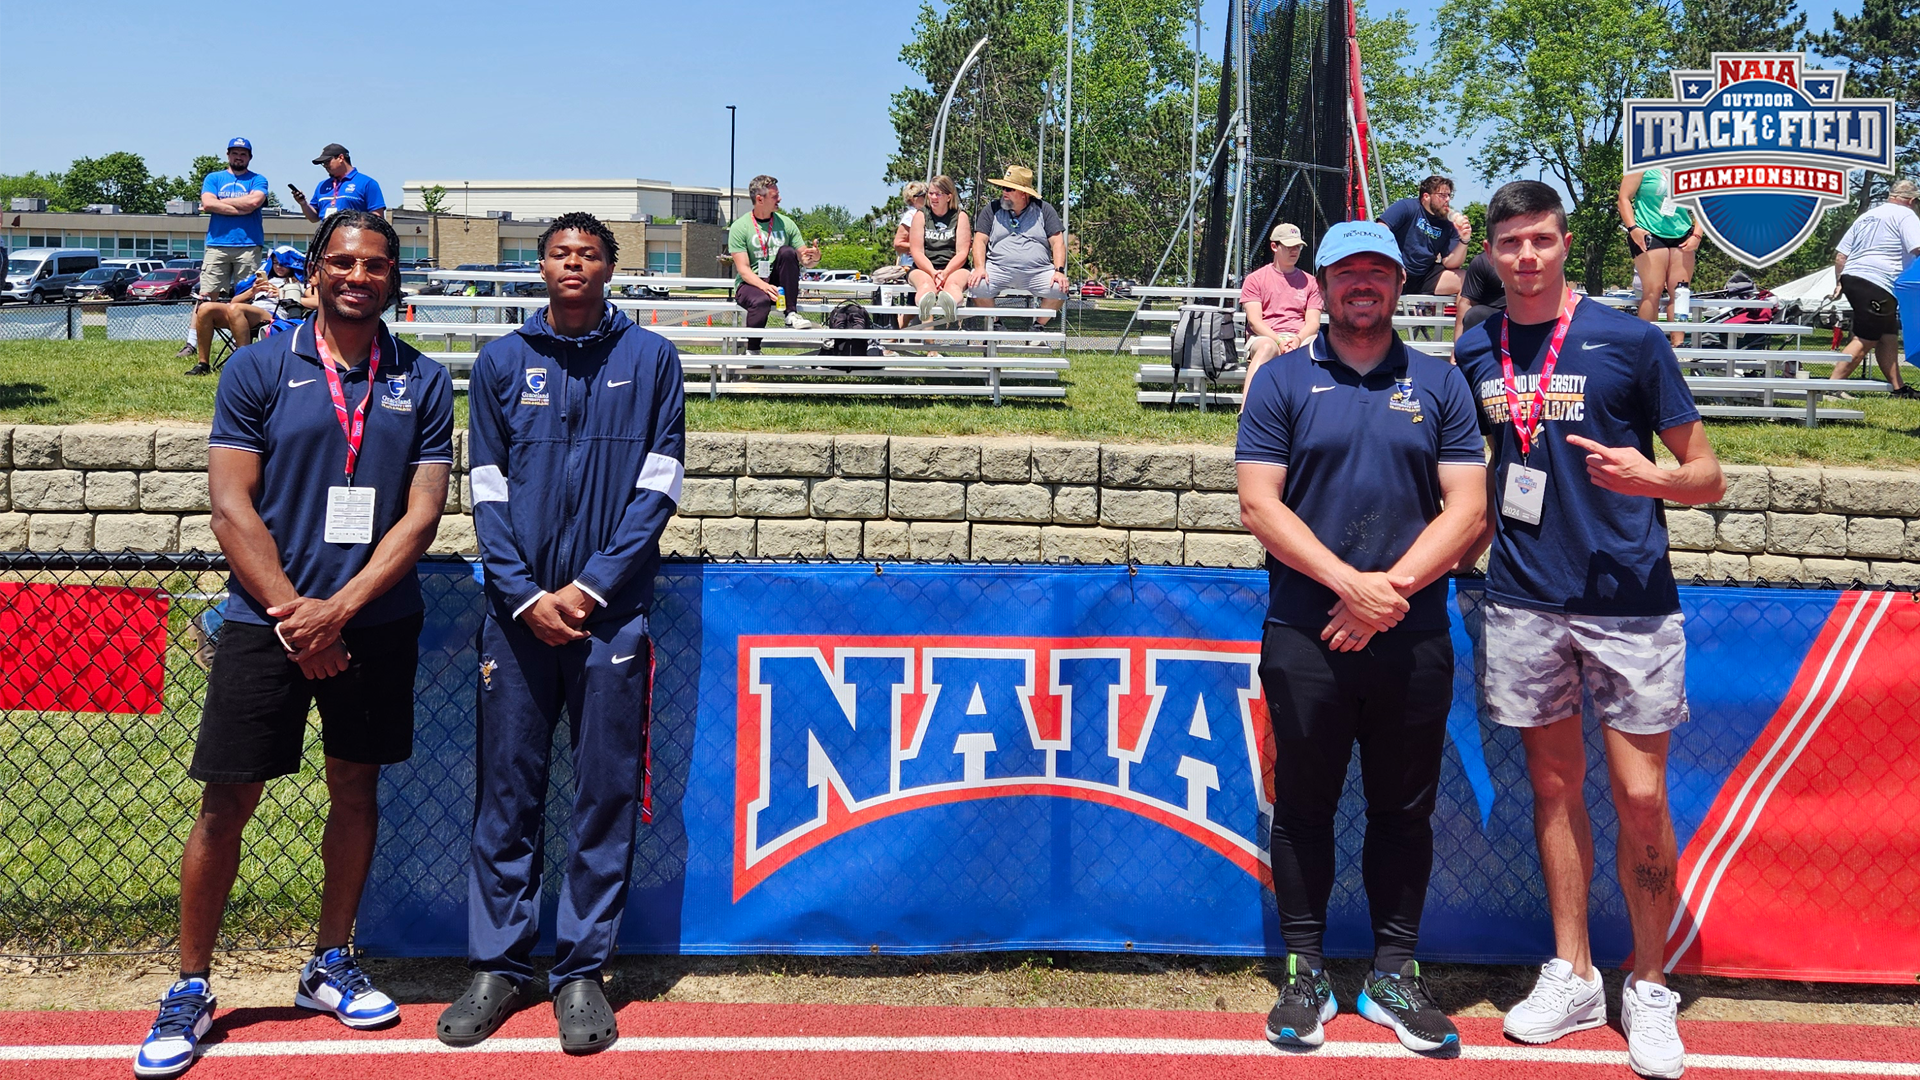 Men’s Track and Field Completes the NAIA Outdoor National Championship; Millslagle Takes Second